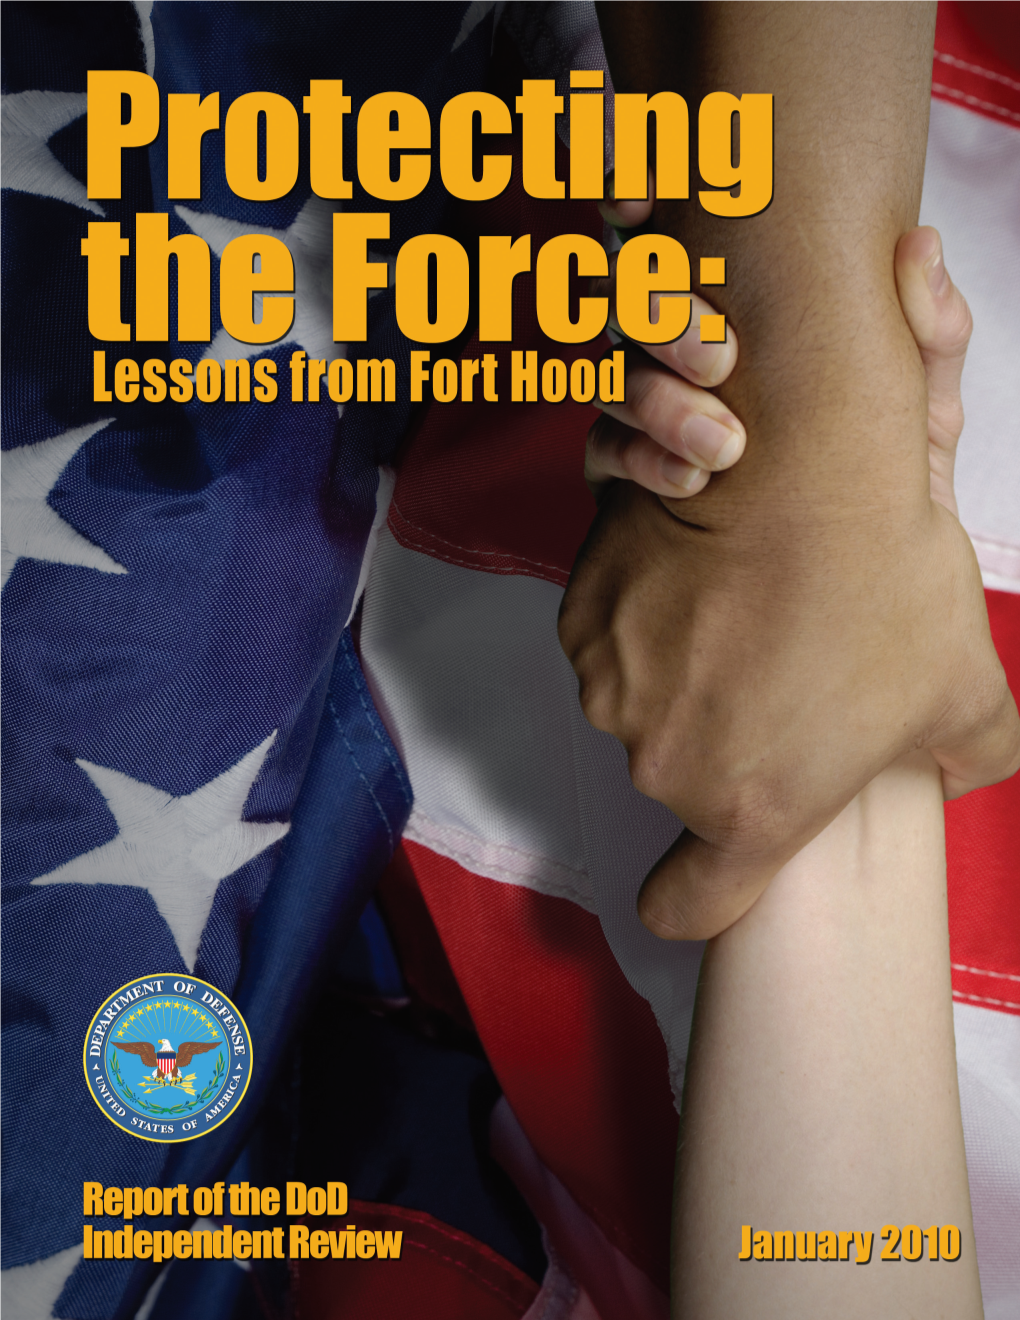 Lessons from Fort Hood